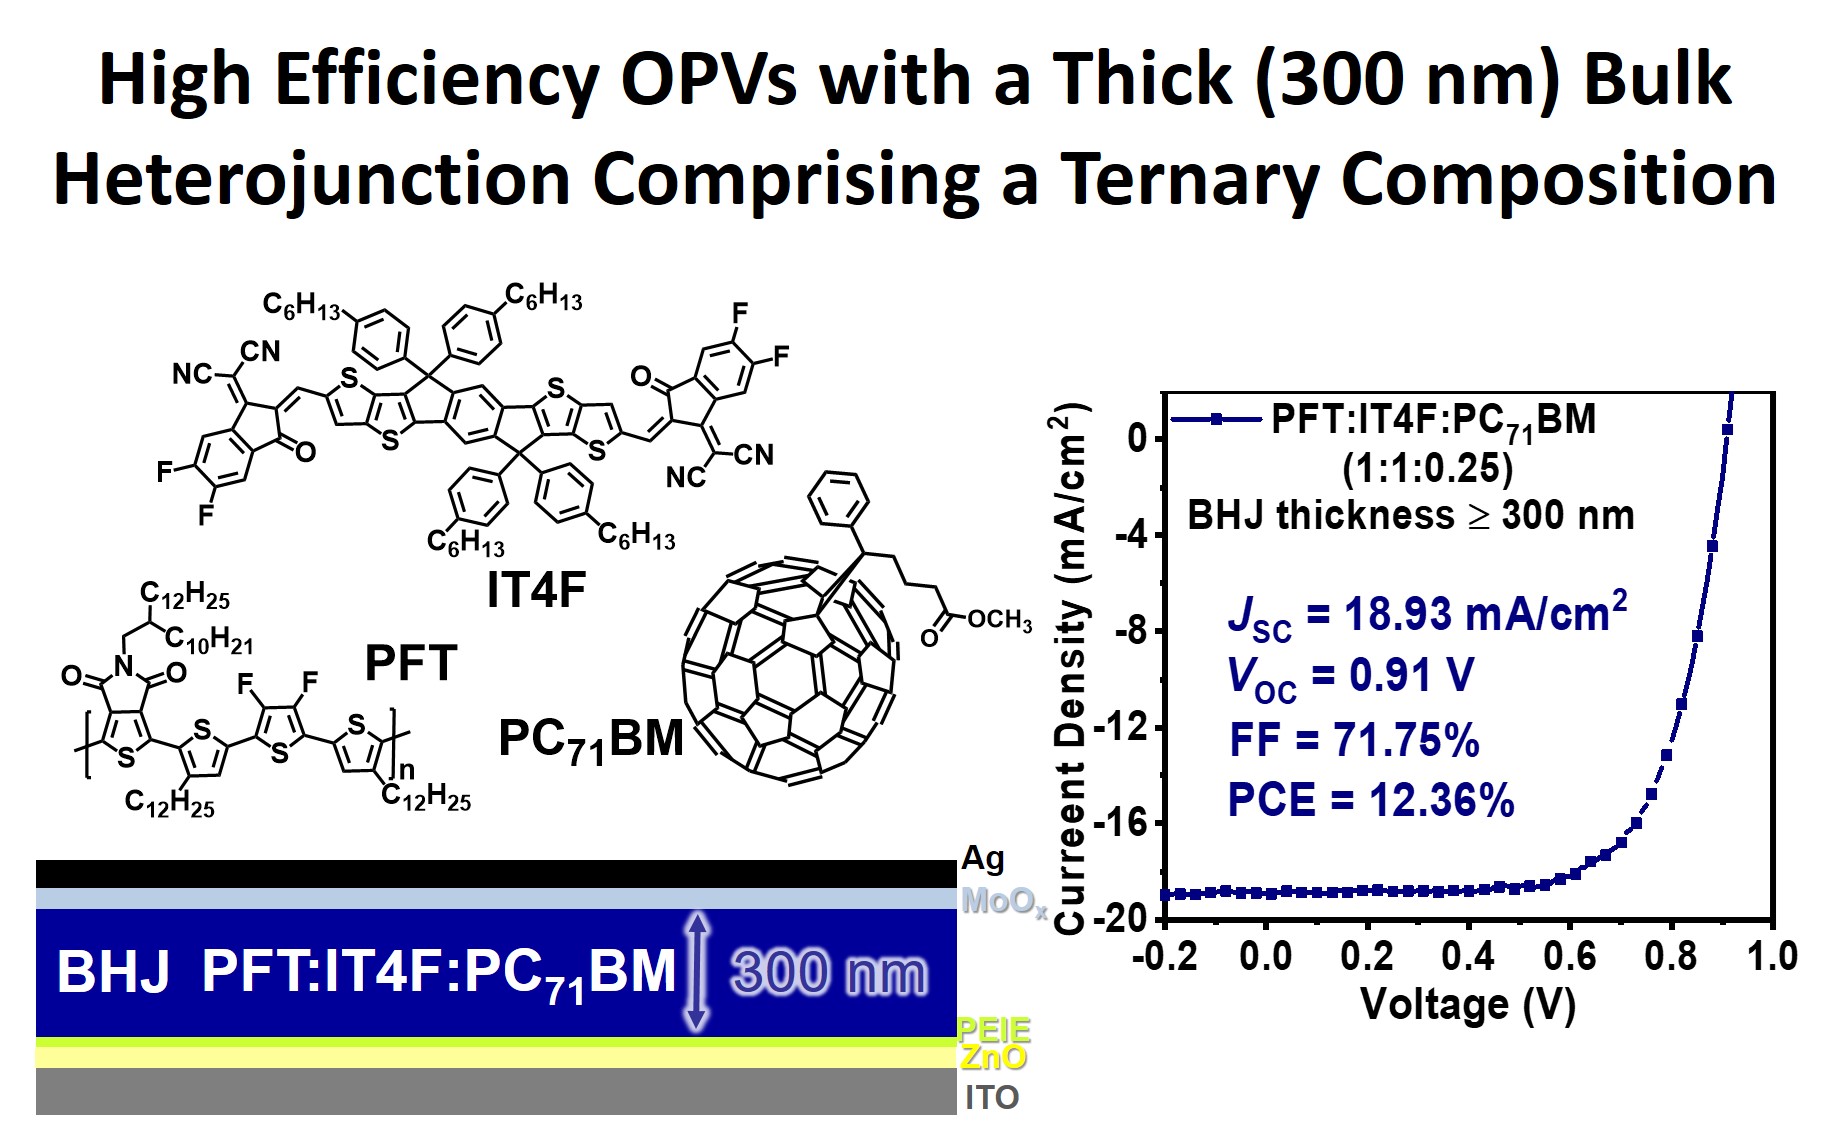 High Efficiency OPVs with a Thick (300 nm) Bulk Heterojunction Comprising a Ternary Composition